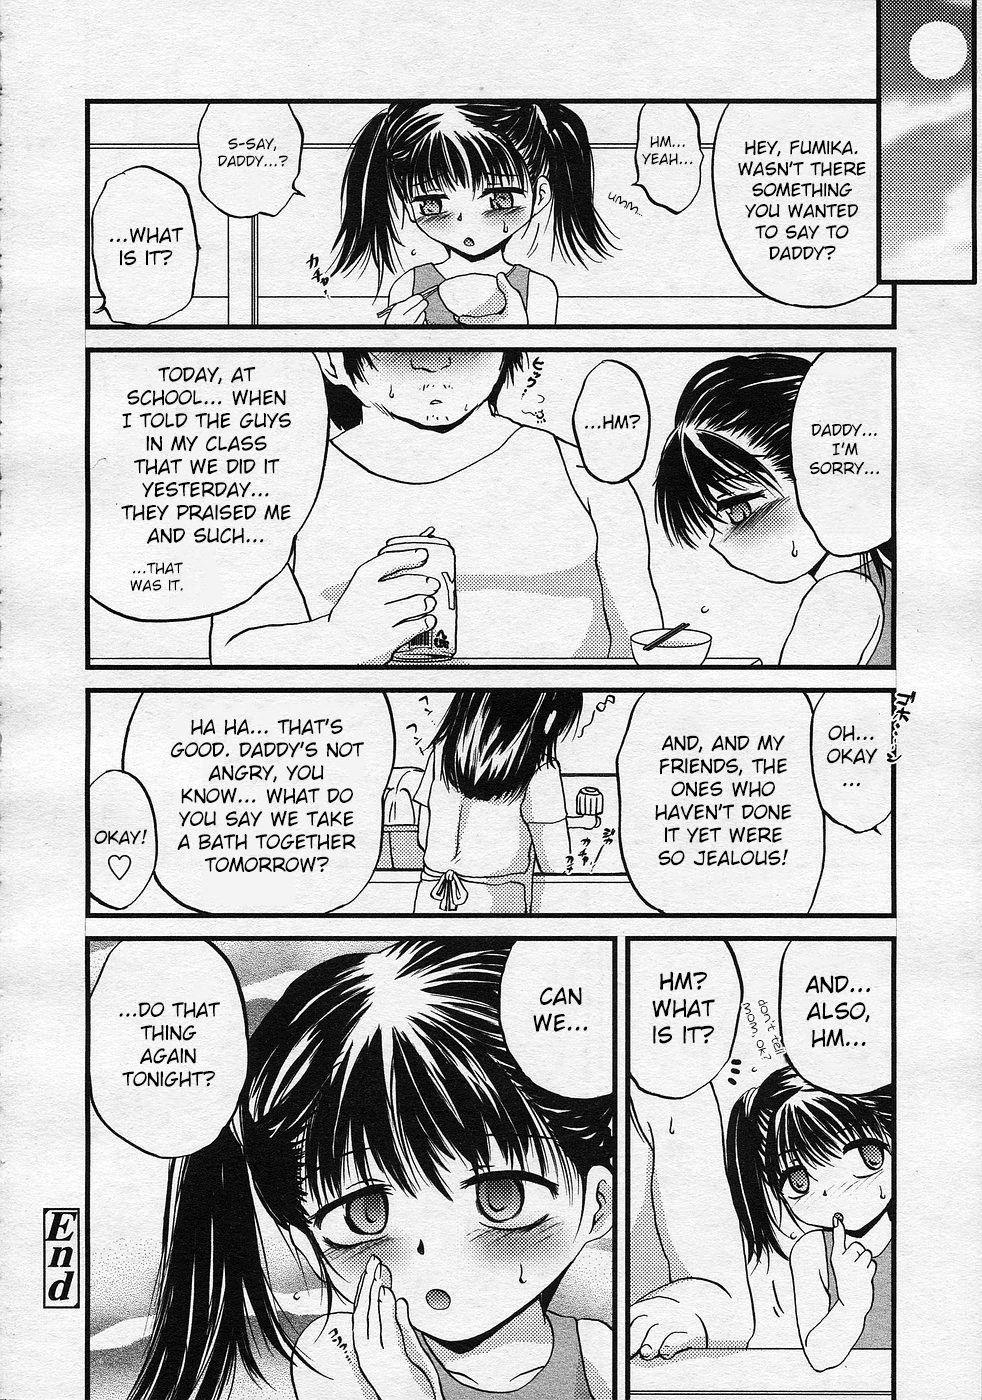 Red Head Musume no shiawase wa Papa no shiawase | A daughter's happiness is her daddy's happiness Hot Couple Sex - Page 12